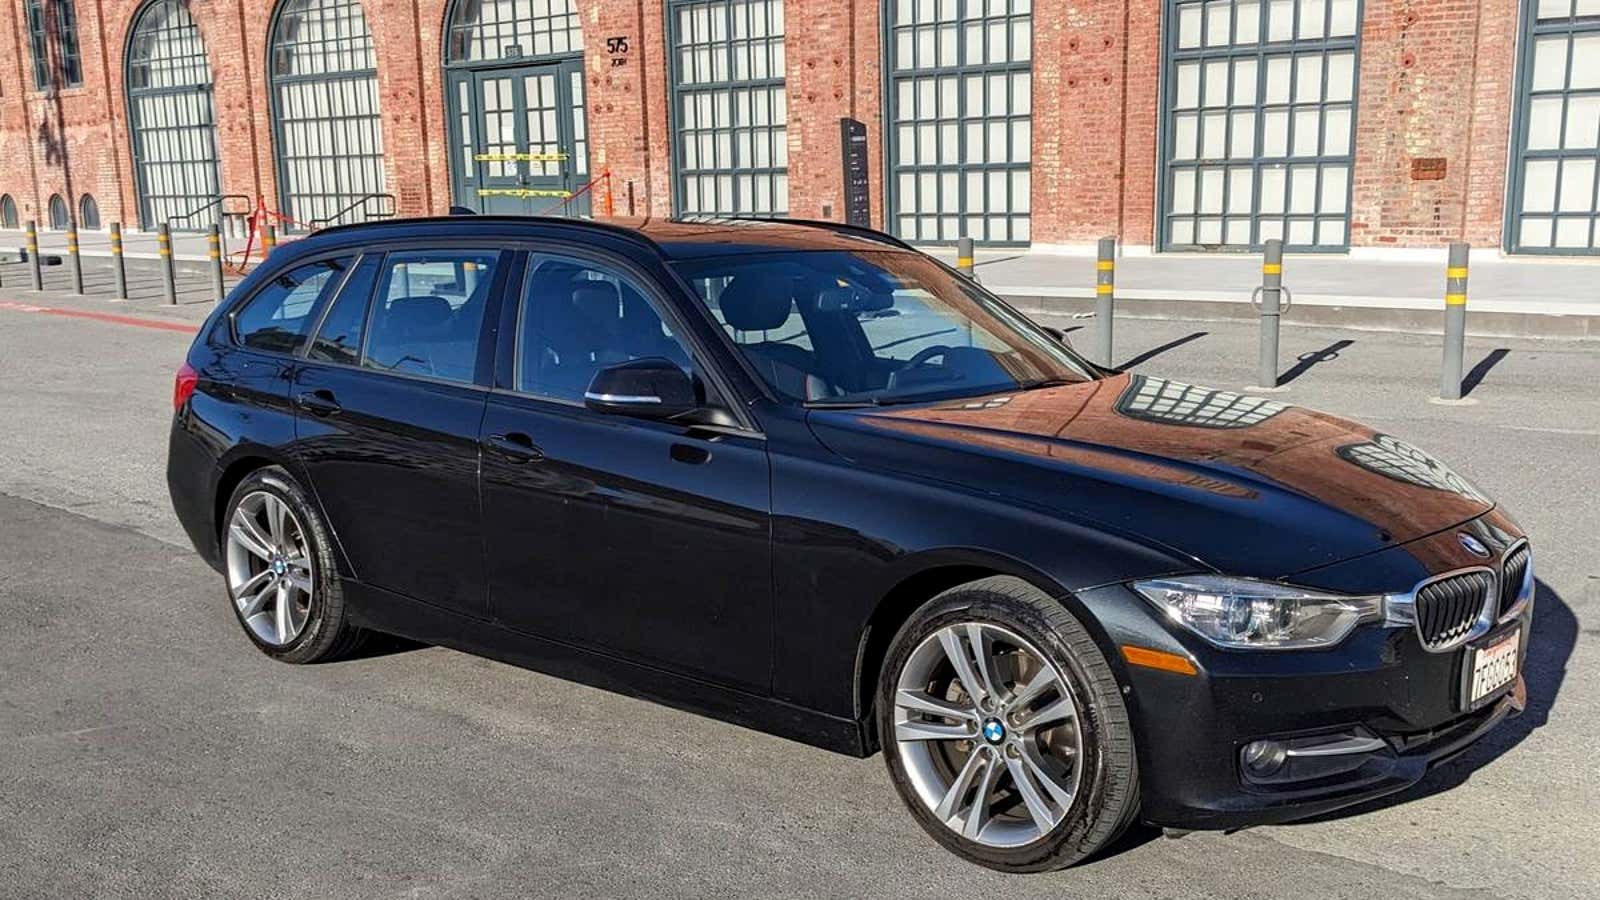 Image for At $15,900, Is This 2014 BMW 328d xDrive Wagon The Ultimate Hauling Machine?